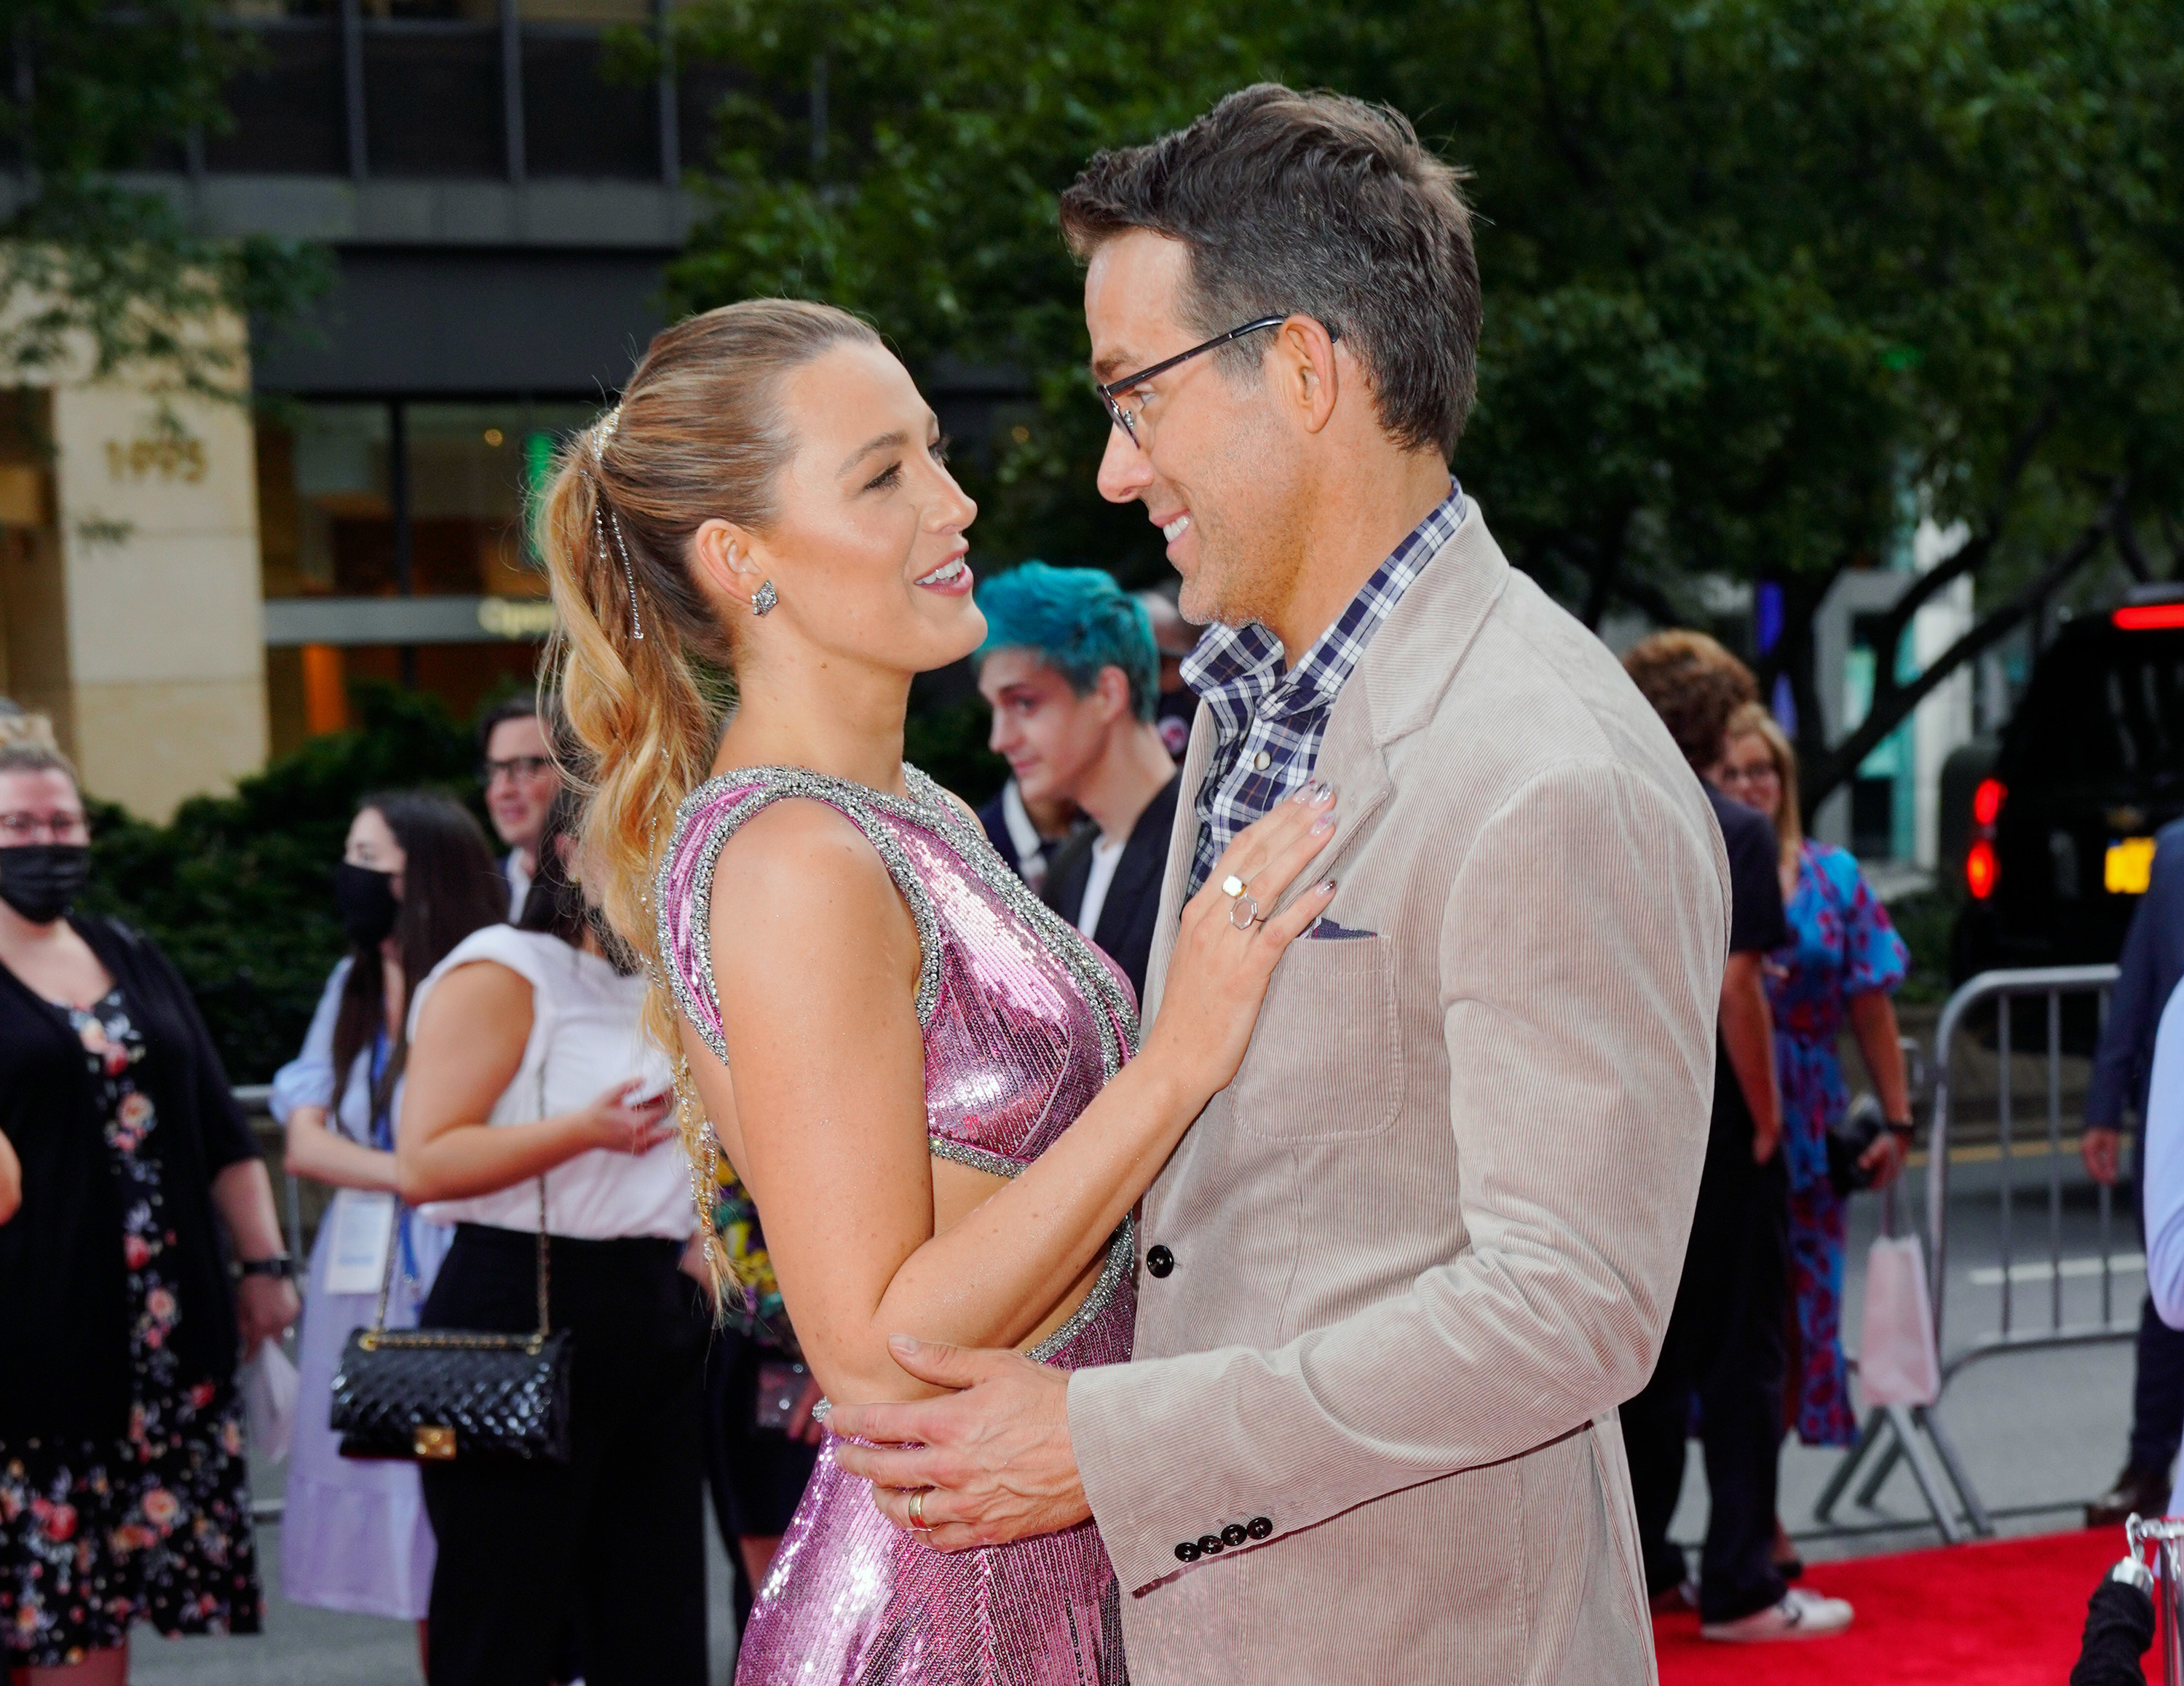 Blake Lively Wore Sneakers Under Her Gown on the Red Carpet for